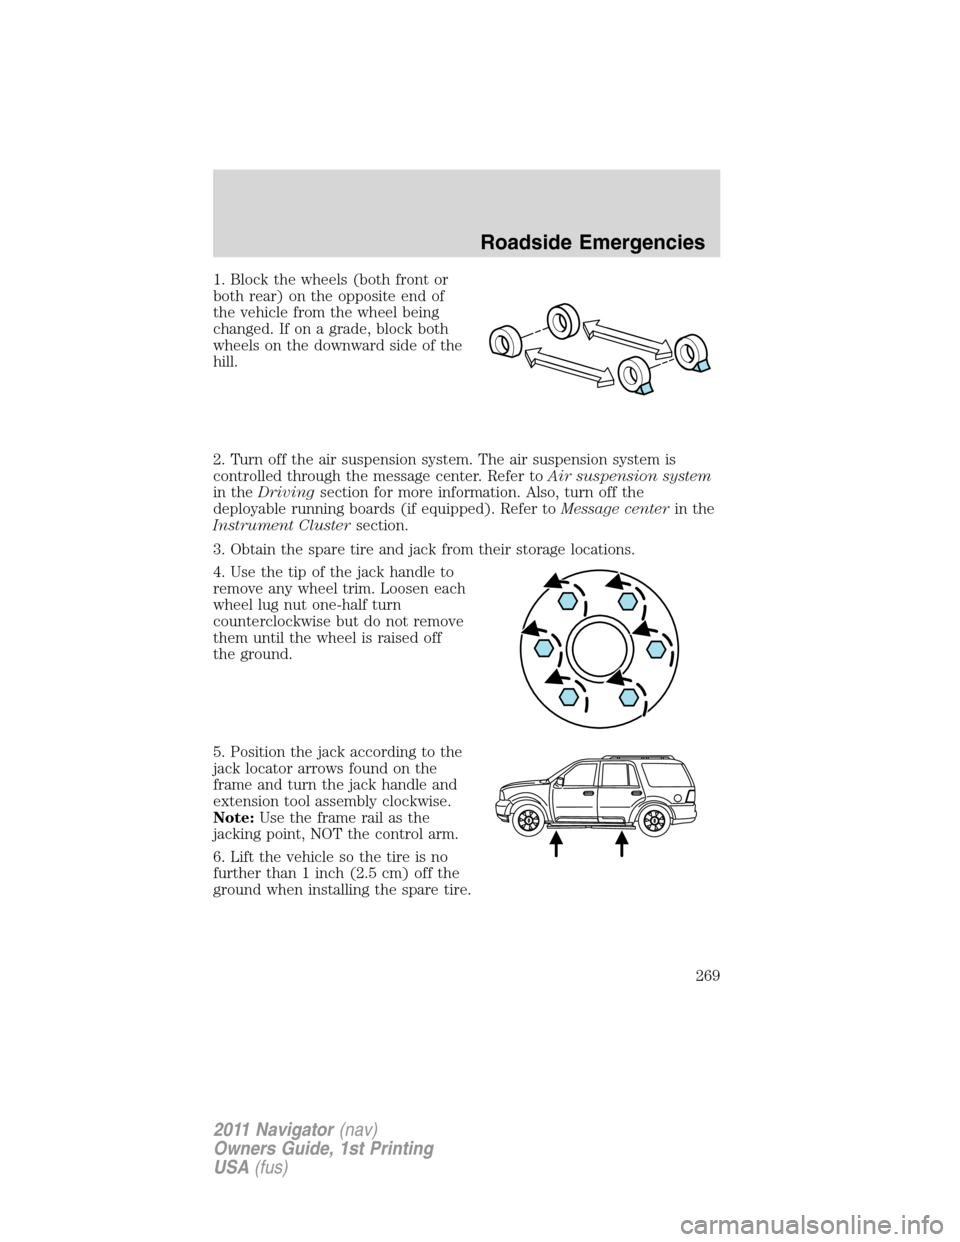 LINCOLN NAVIGATOR 2011  Owners Manual 1. Block the wheels (both front or
both rear) on the opposite end of
the vehicle from the wheel being
changed. If on a grade, block both
wheels on the downward side of the
hill.
2. Turn off the air su